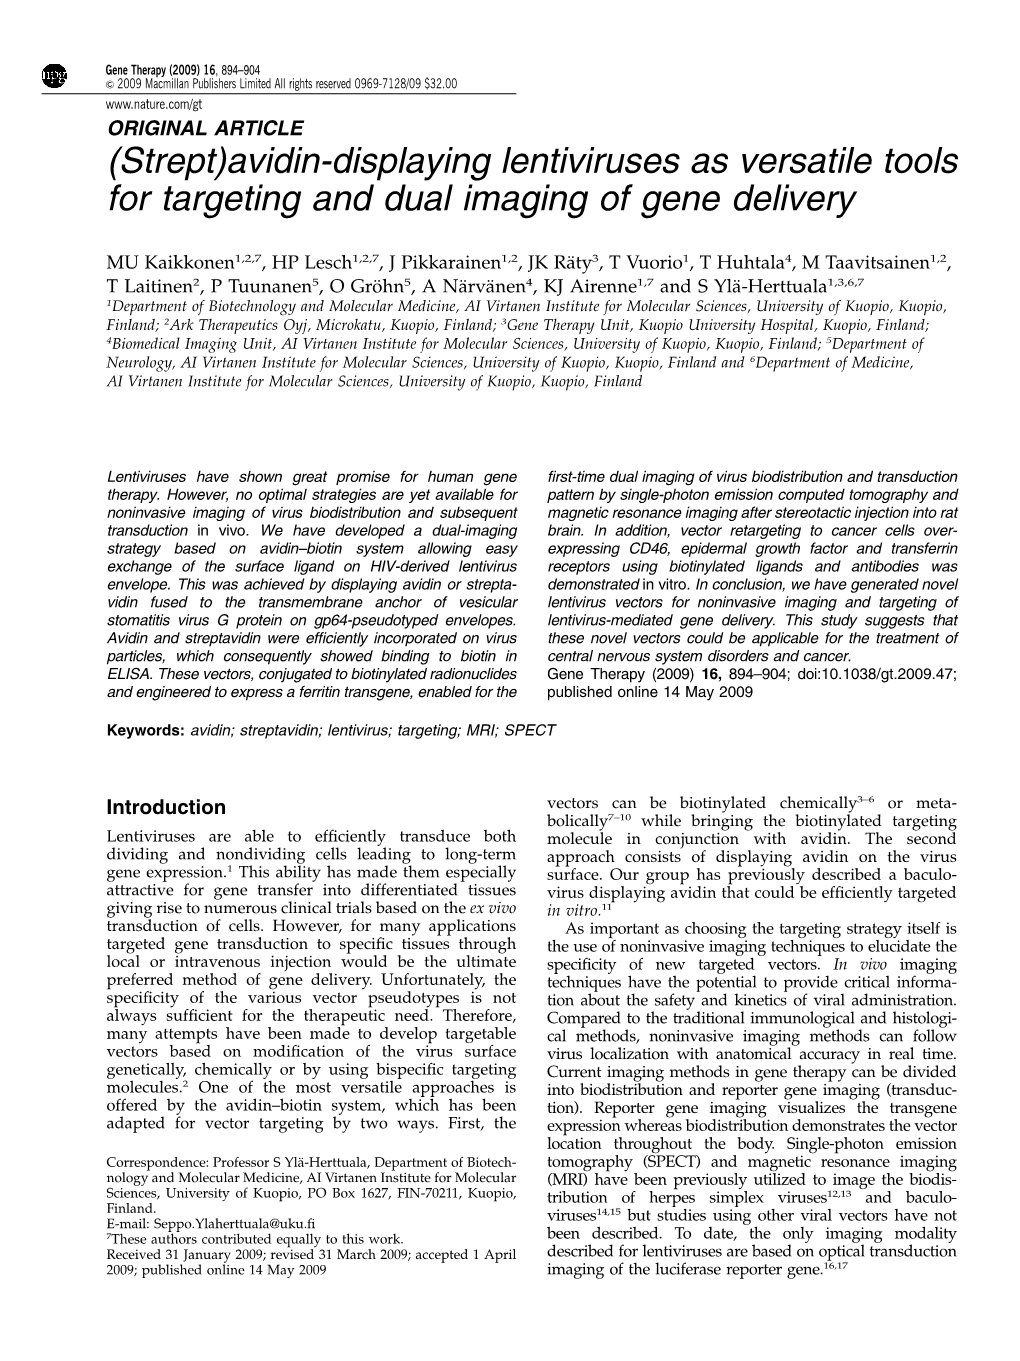 Avidin-Displaying Lentiviruses As Versatile Tools for Targeting and Dual Imaging of Gene Delivery